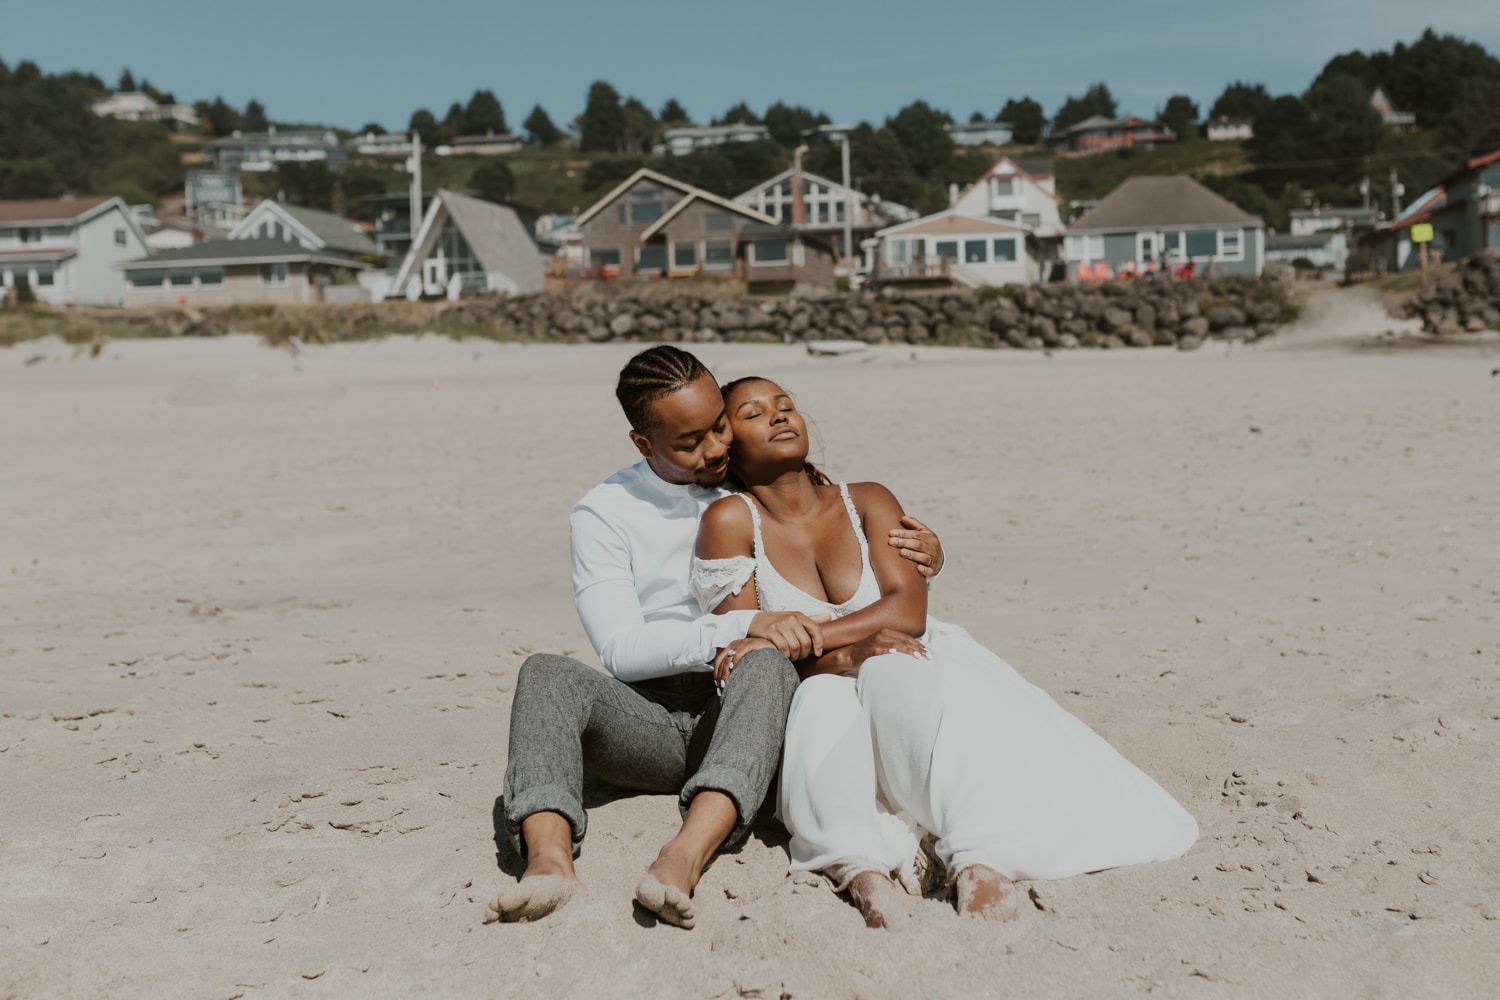 A bride and groom snuggling on a beach in California for their elopement.